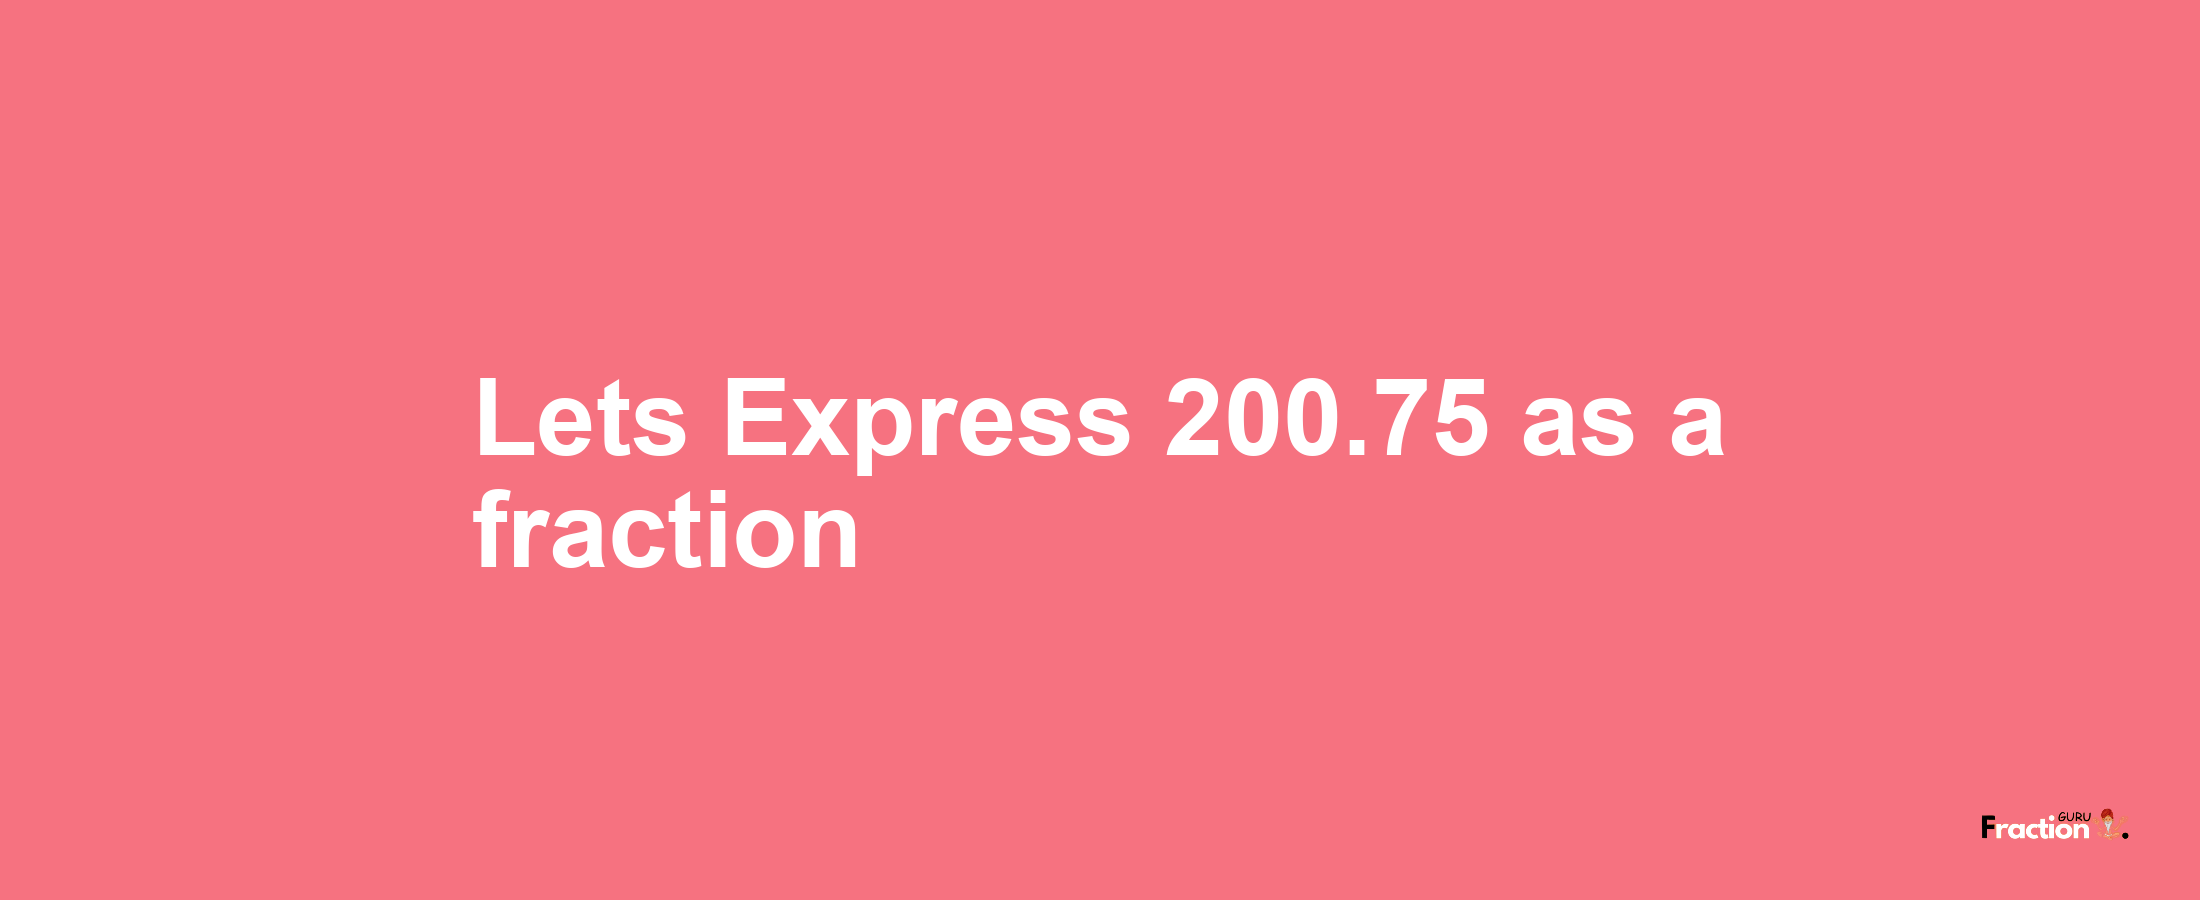 Lets Express 200.75 as afraction